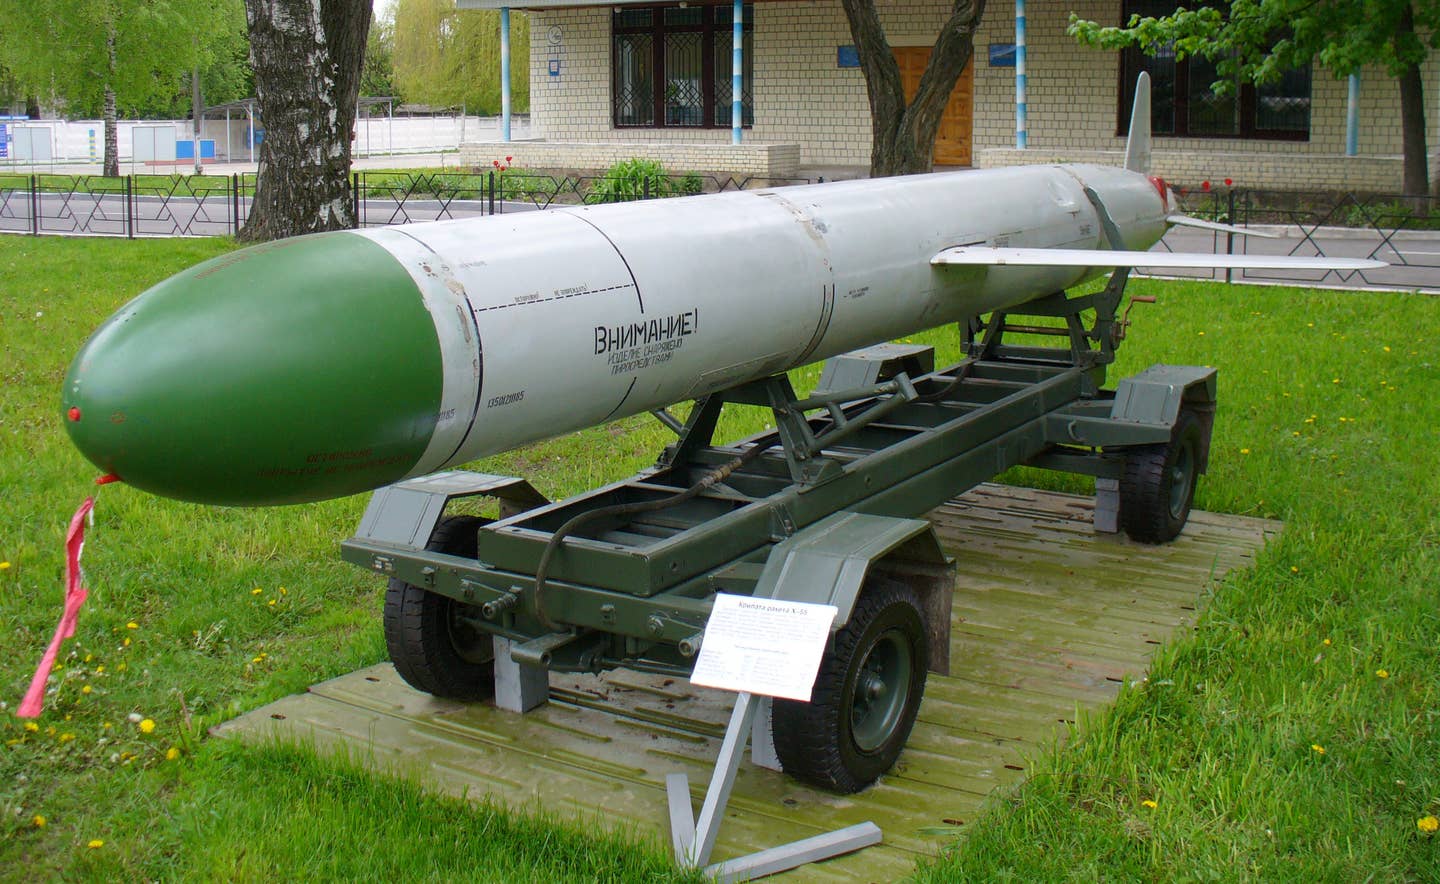 A Kh-55 cruise missile in the Ukrainian Air Force Museum. <em>George Chernilevsky/Wikimedia Commons</em>